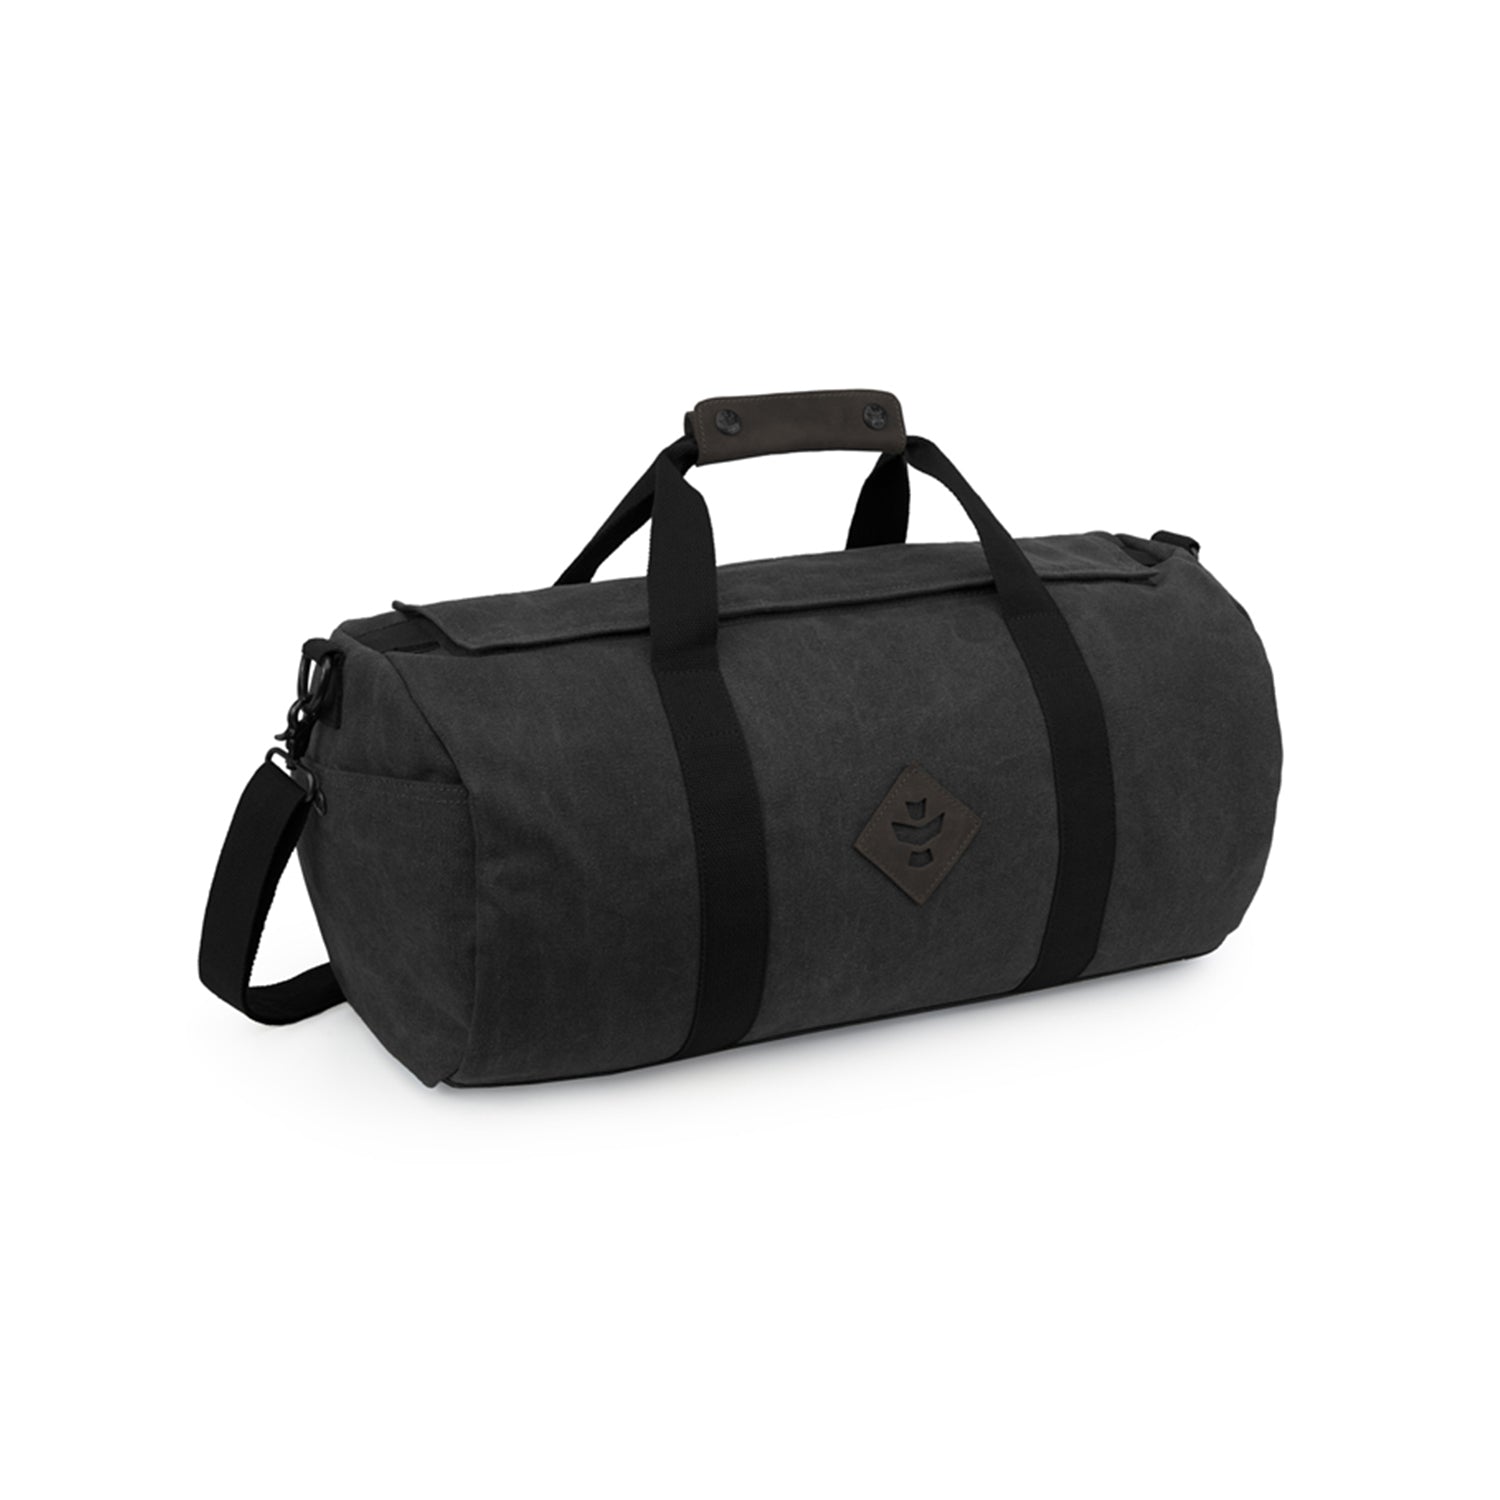 Smoke Canvas Smell Proof Water Resistant Small Duffle Bag